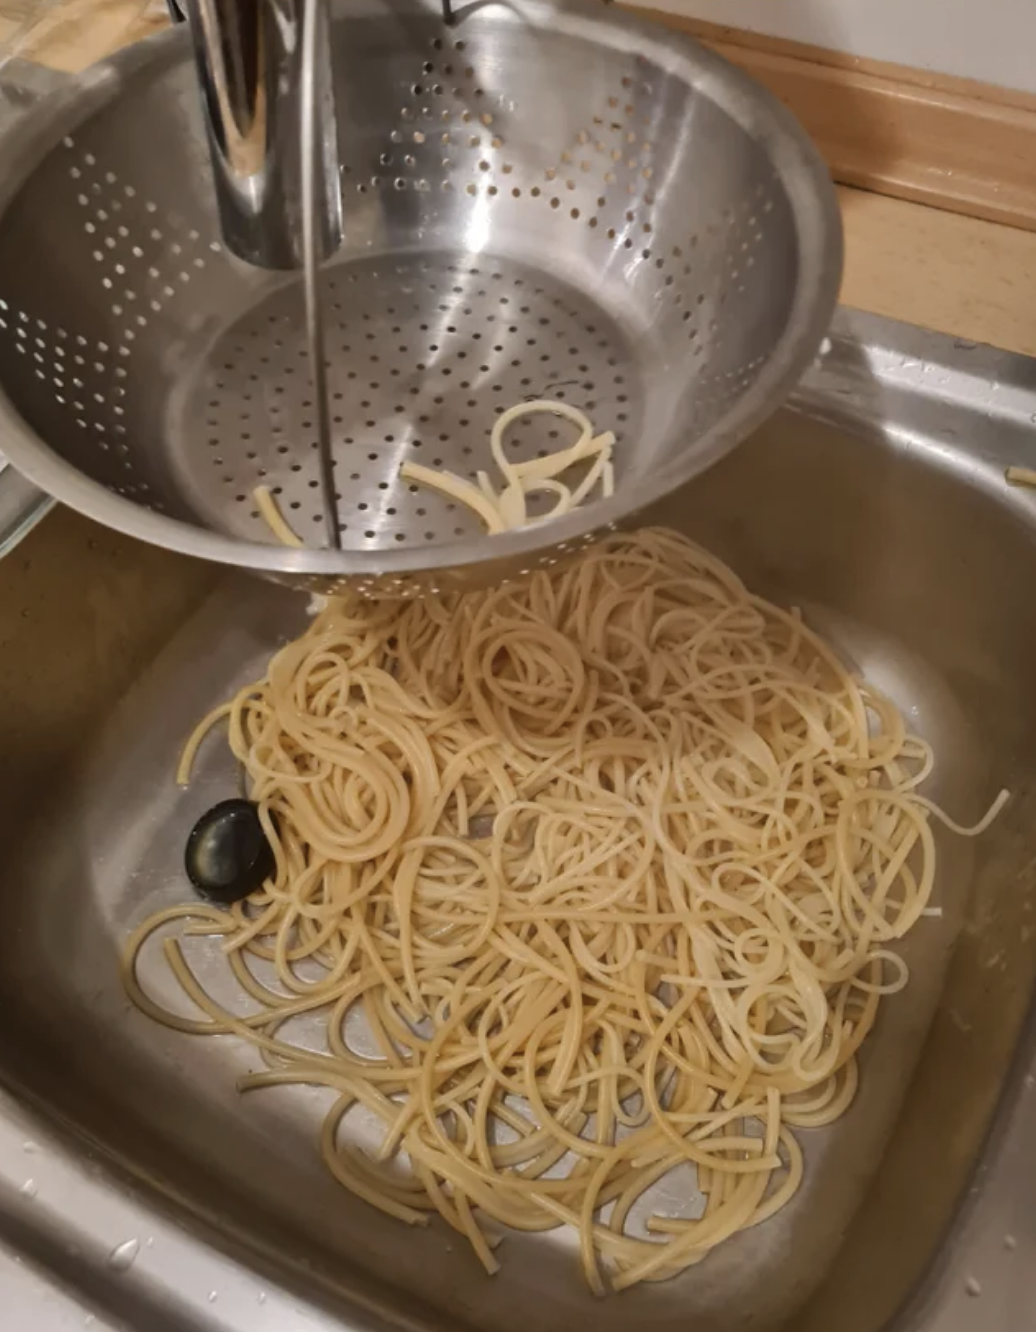 Noodles in the sink